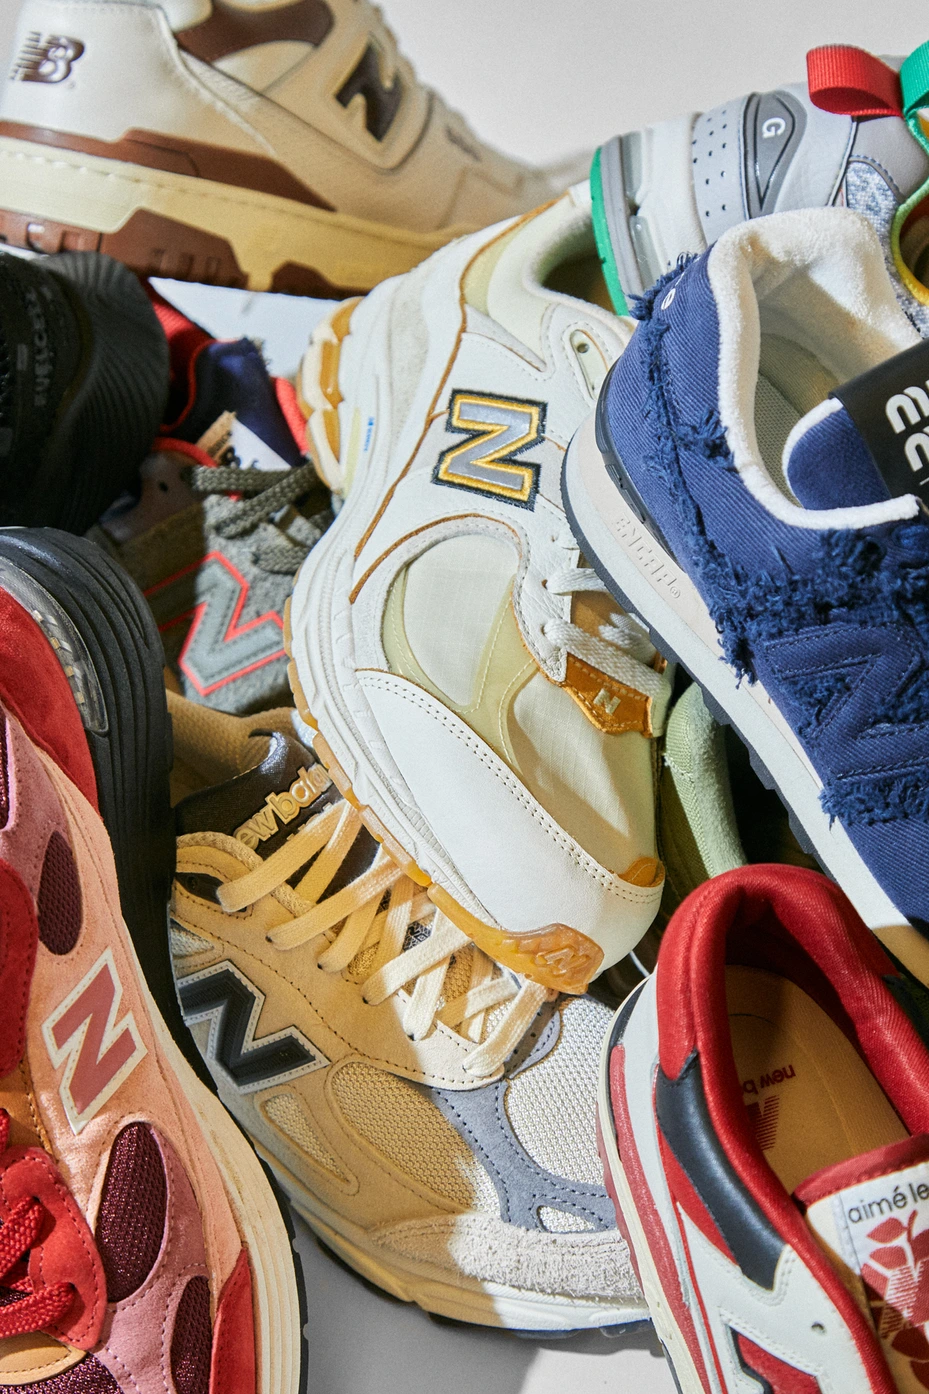 How New Balance Reinvented Its Brand